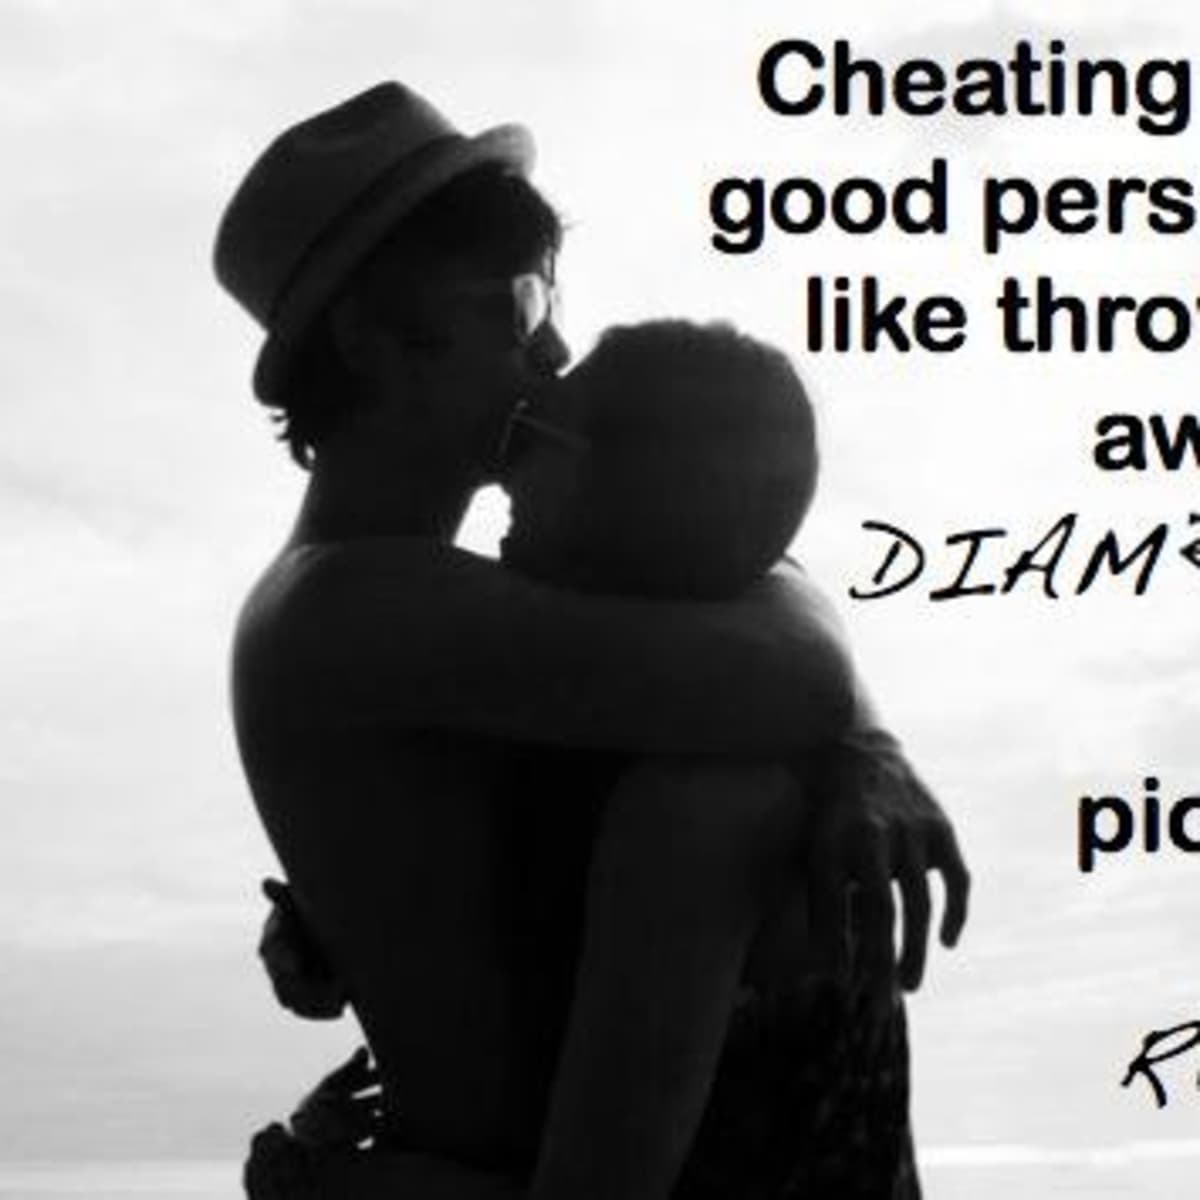 Top 999 Cheating Quotes Images Amazing Collection Cheating Quotes Images Full 4k